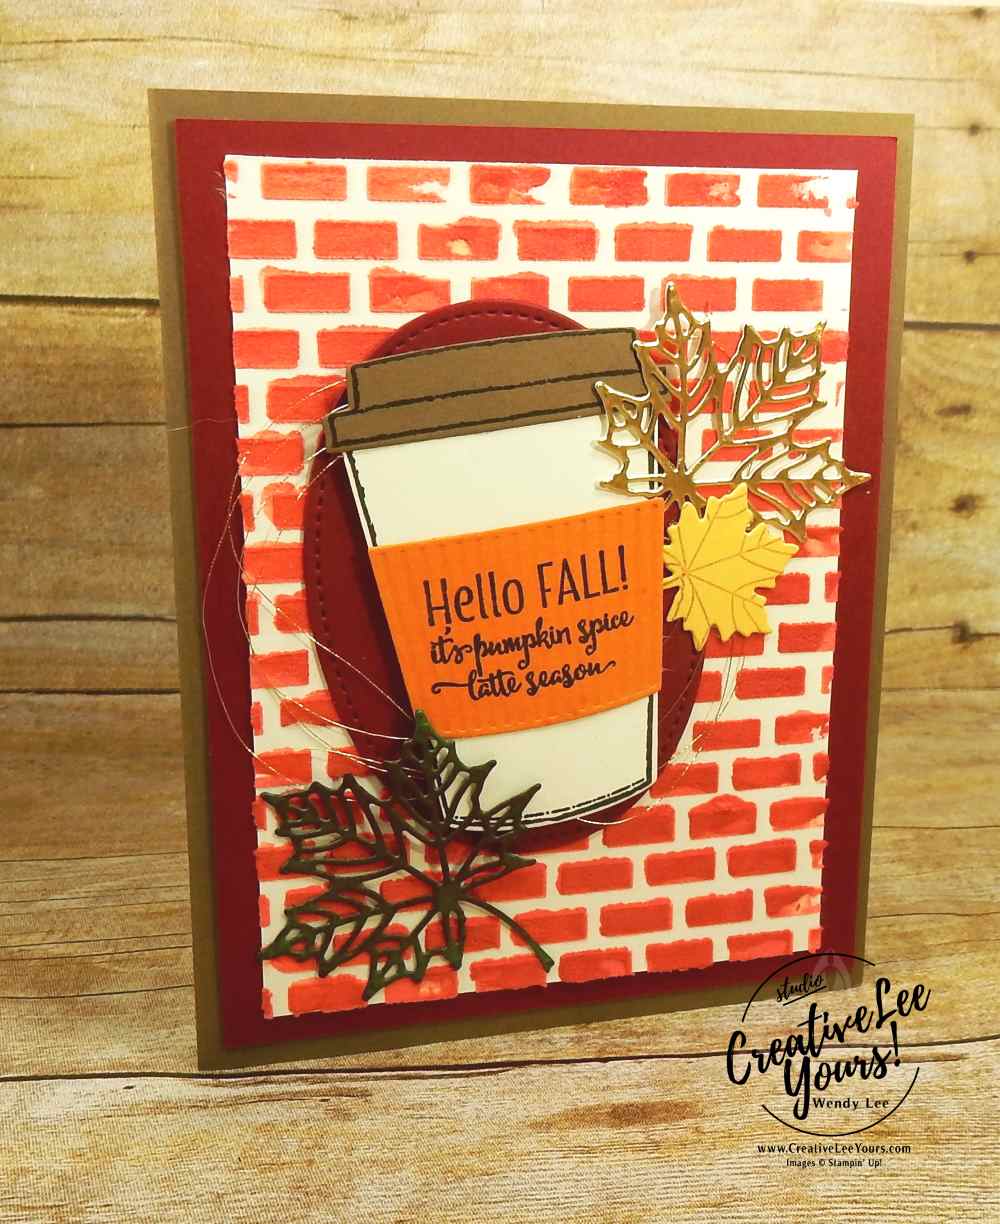 Hello Fall by Jennifer Gerwig Dively, Stampin Up, #creativeleeyours, creatively yours, wendy lee, diemonds team swap,fallcards, handmade, stamping,merry cafe stamp set, coffee cups framelits